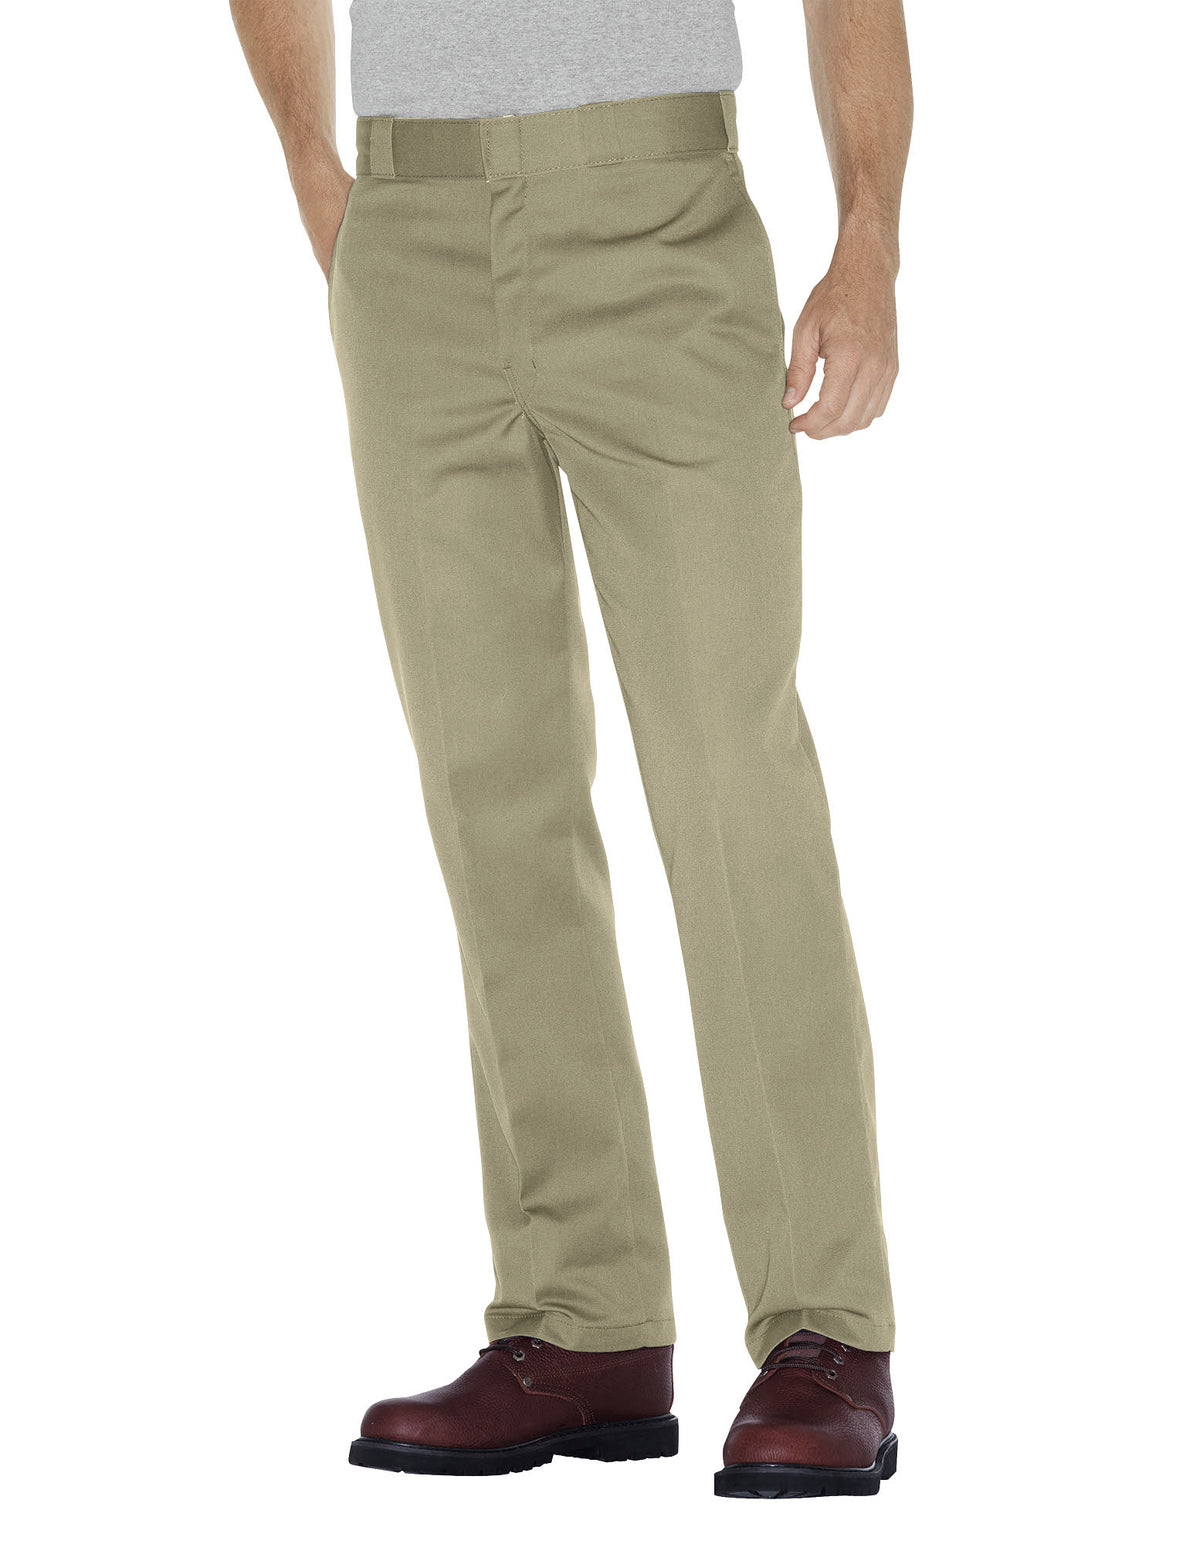 Goodfellow & Co Mens Skinny Fit Hennepin Chino Pants Olive 30x36 | Wish